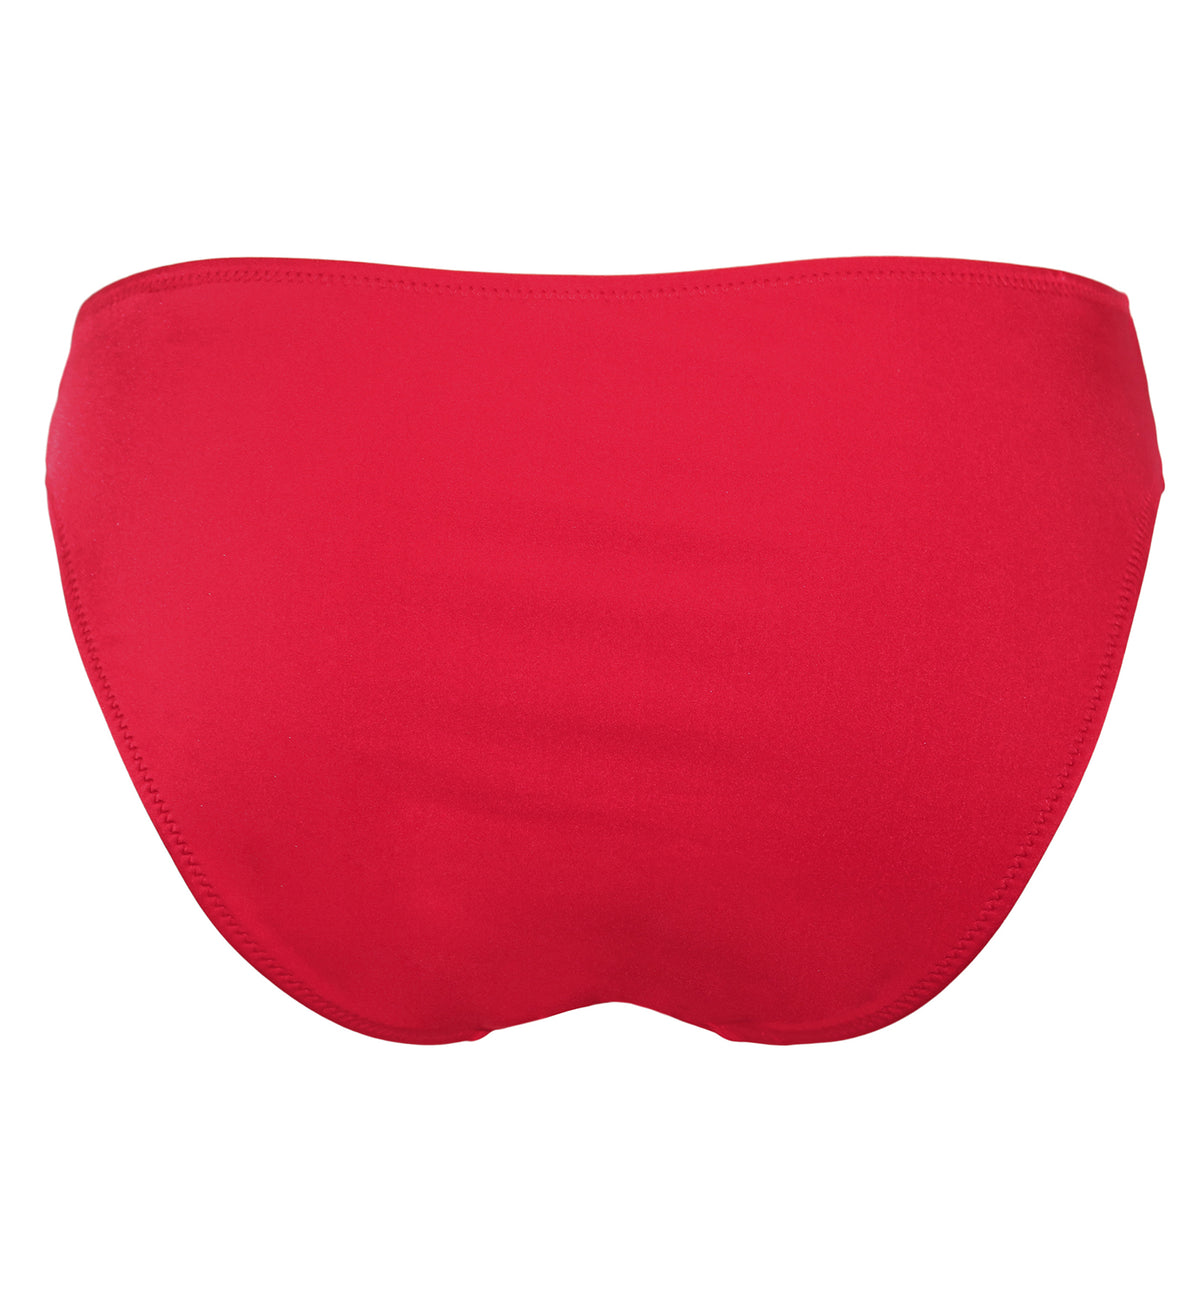 Pour Moi Samoa Ring Detail Swim Brief (20913),XS,Red - Red,XS